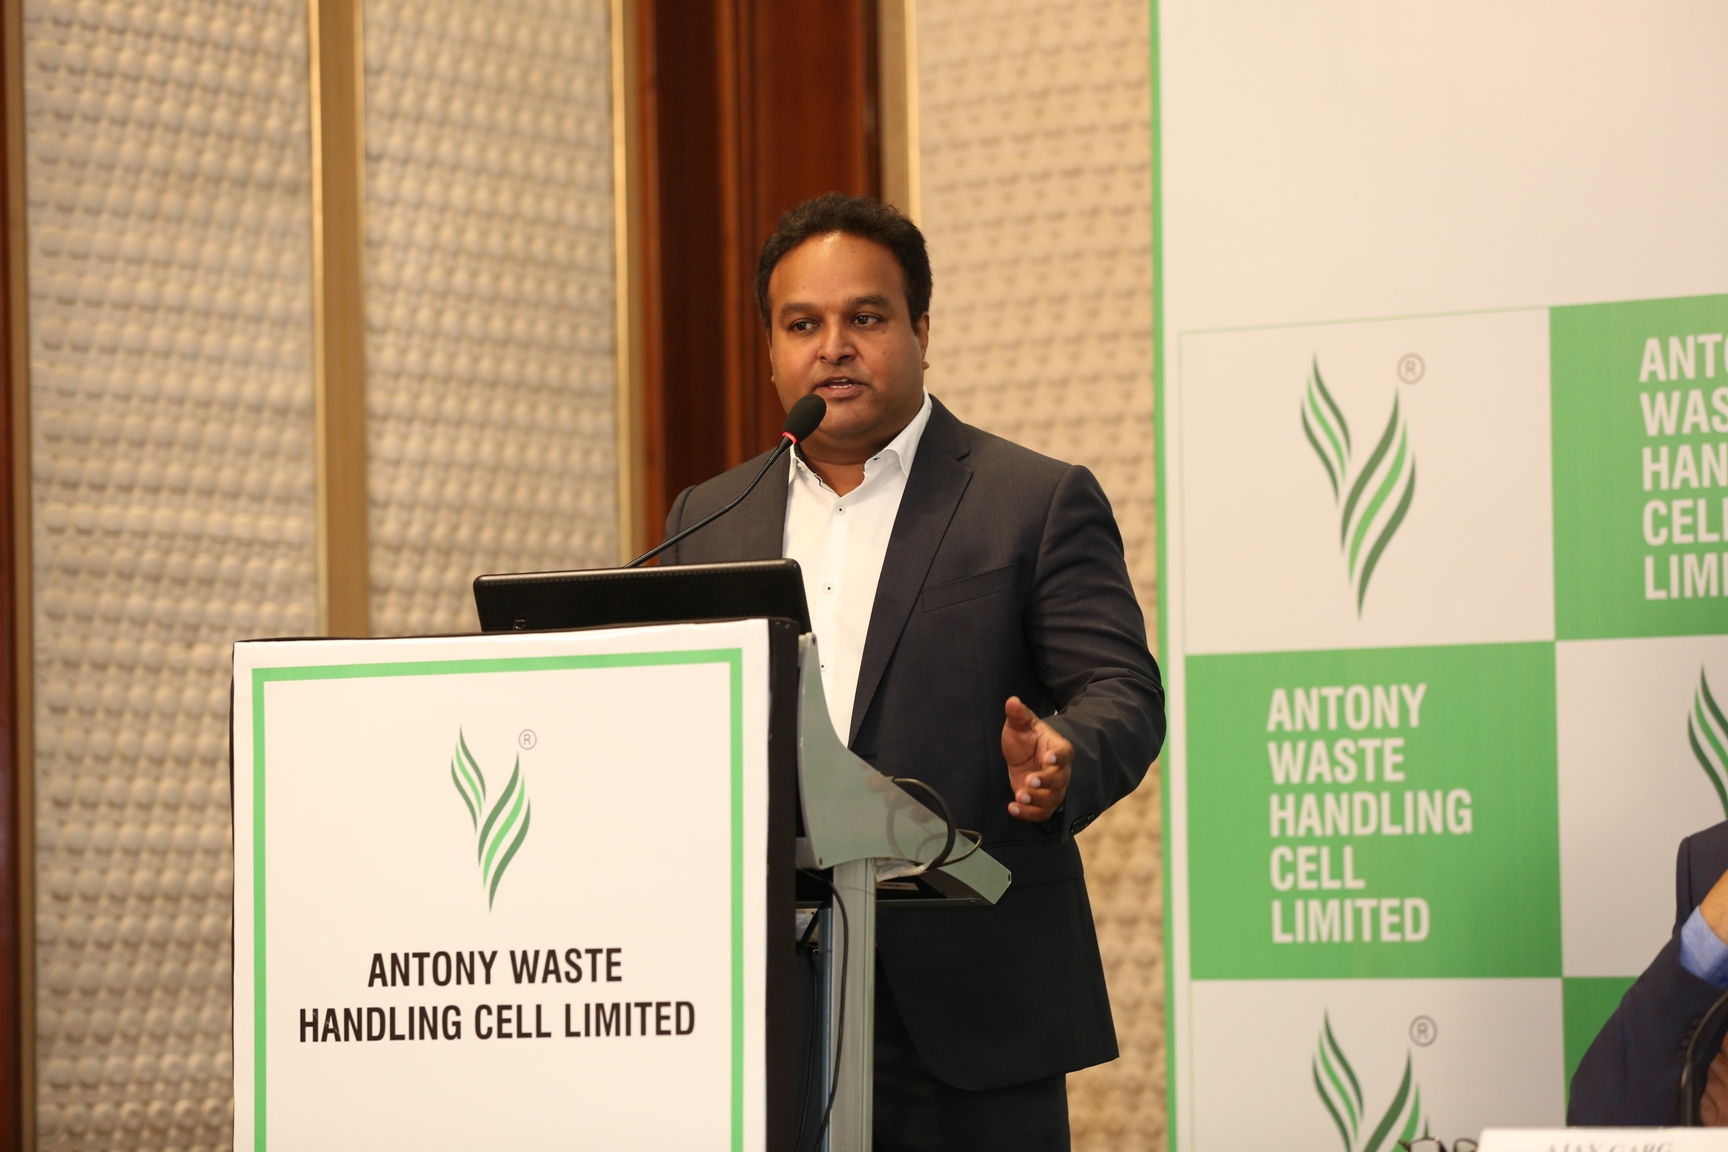 Jose Jacob (CMD) at the IPO press conference of Antony Waste Handling Cell Ltd.